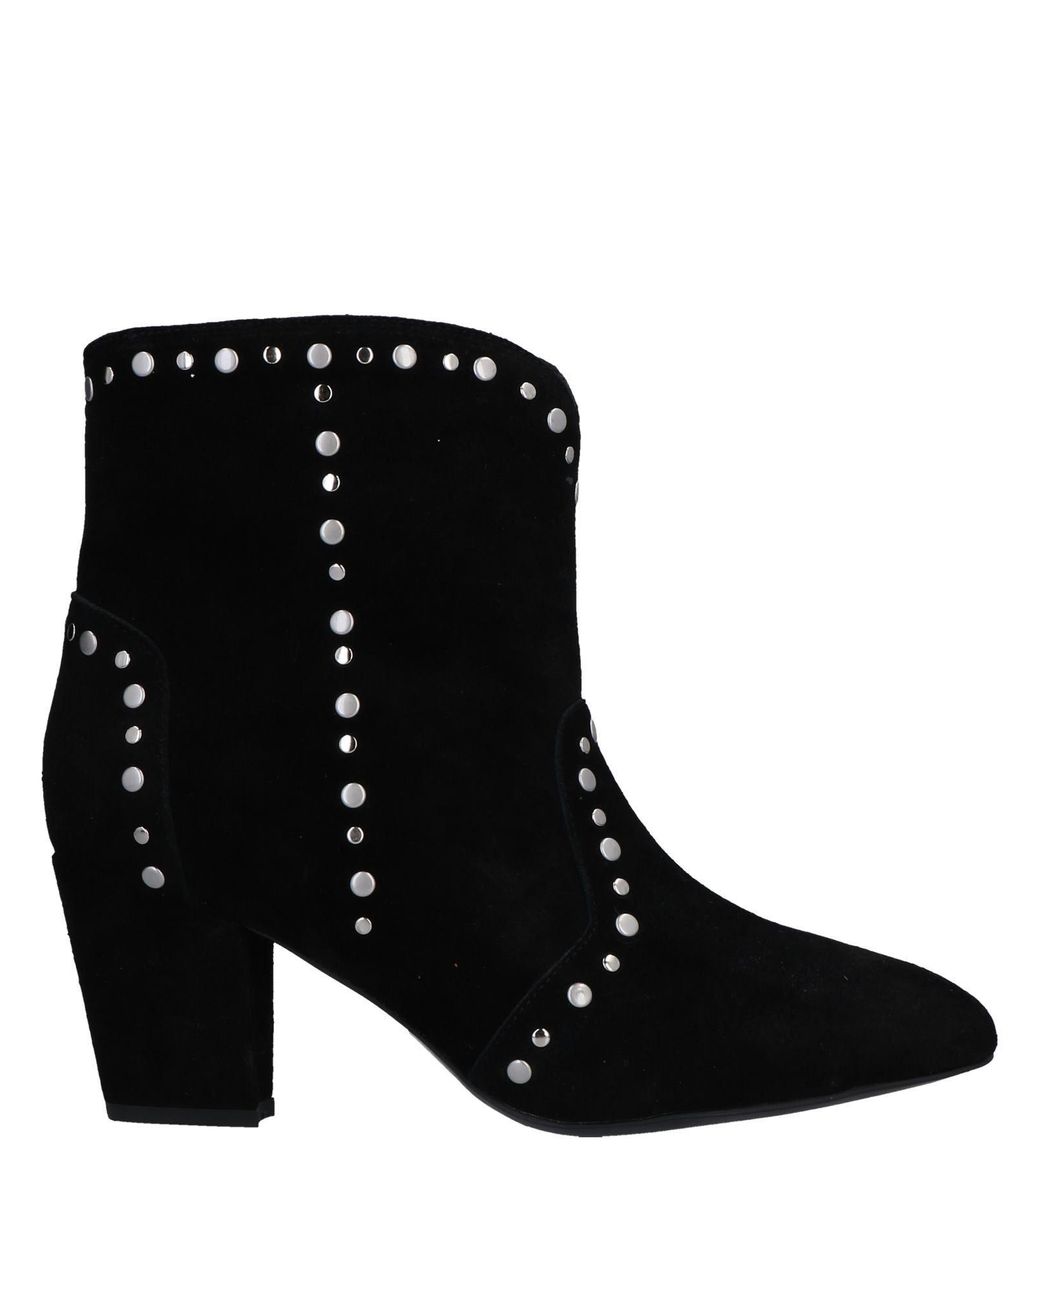 Bibi Lou Suede Ankle Boots in Black - Lyst